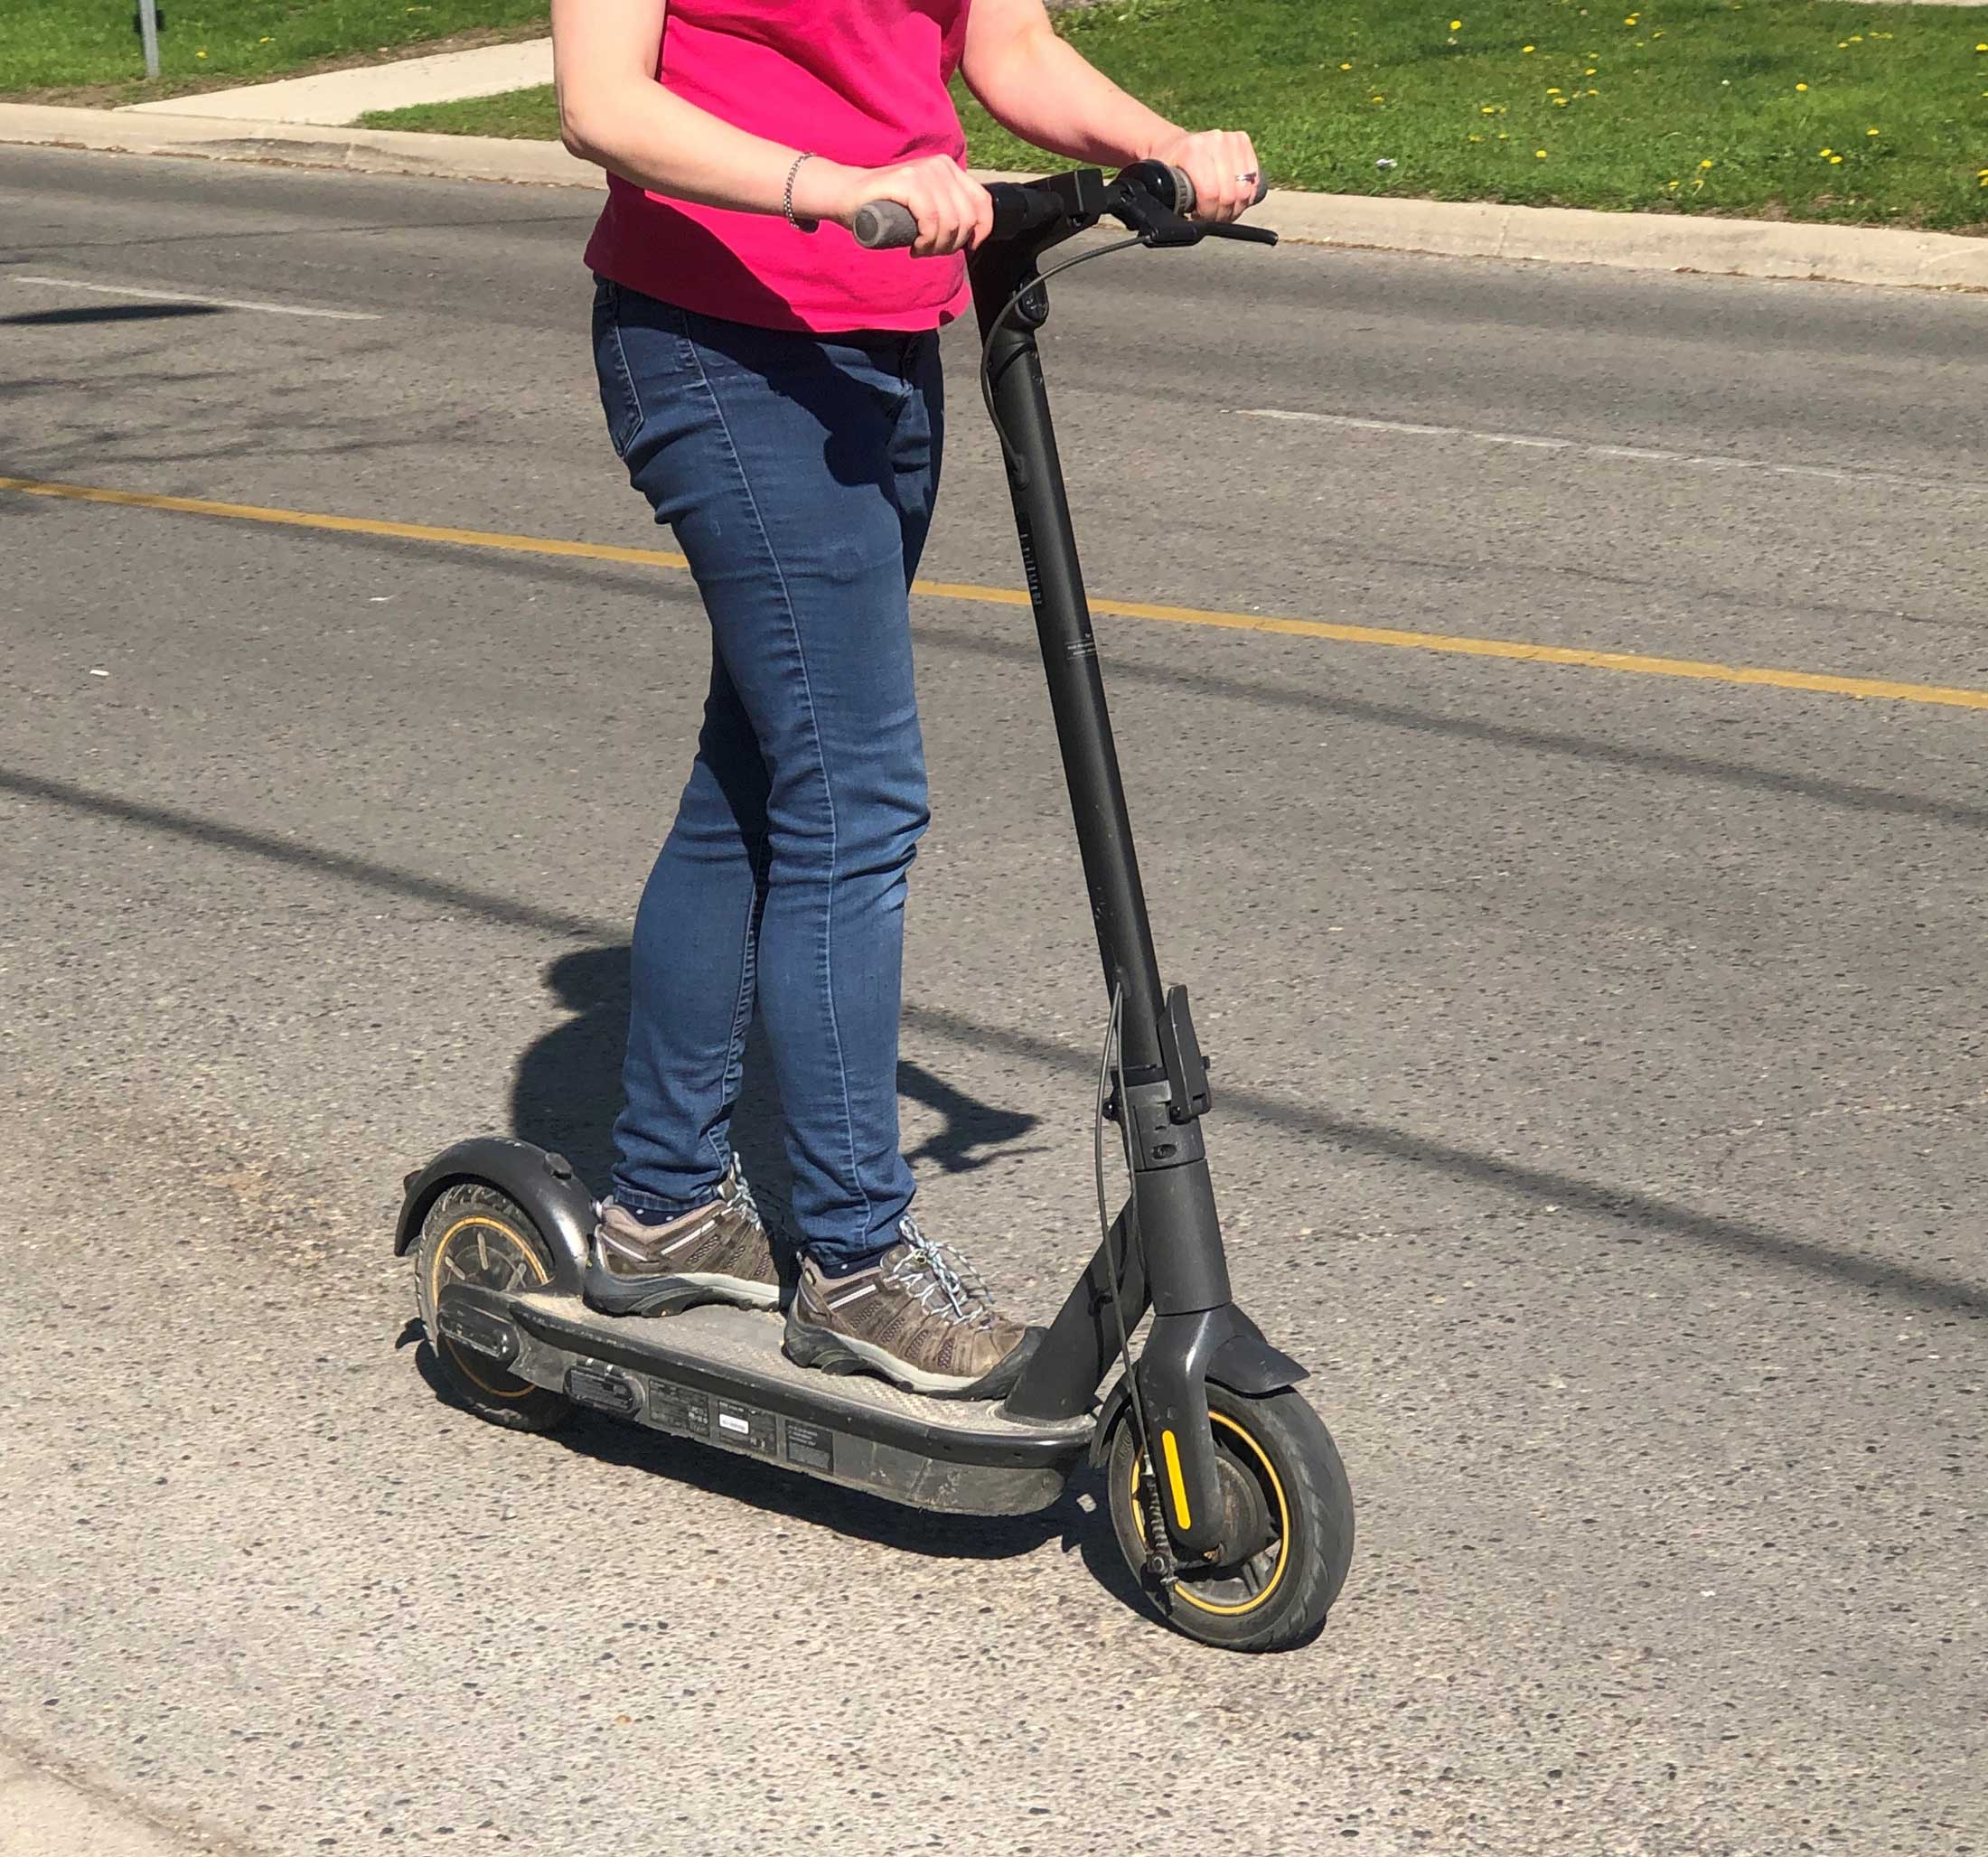 Woman riding a personal electric kick-scooter